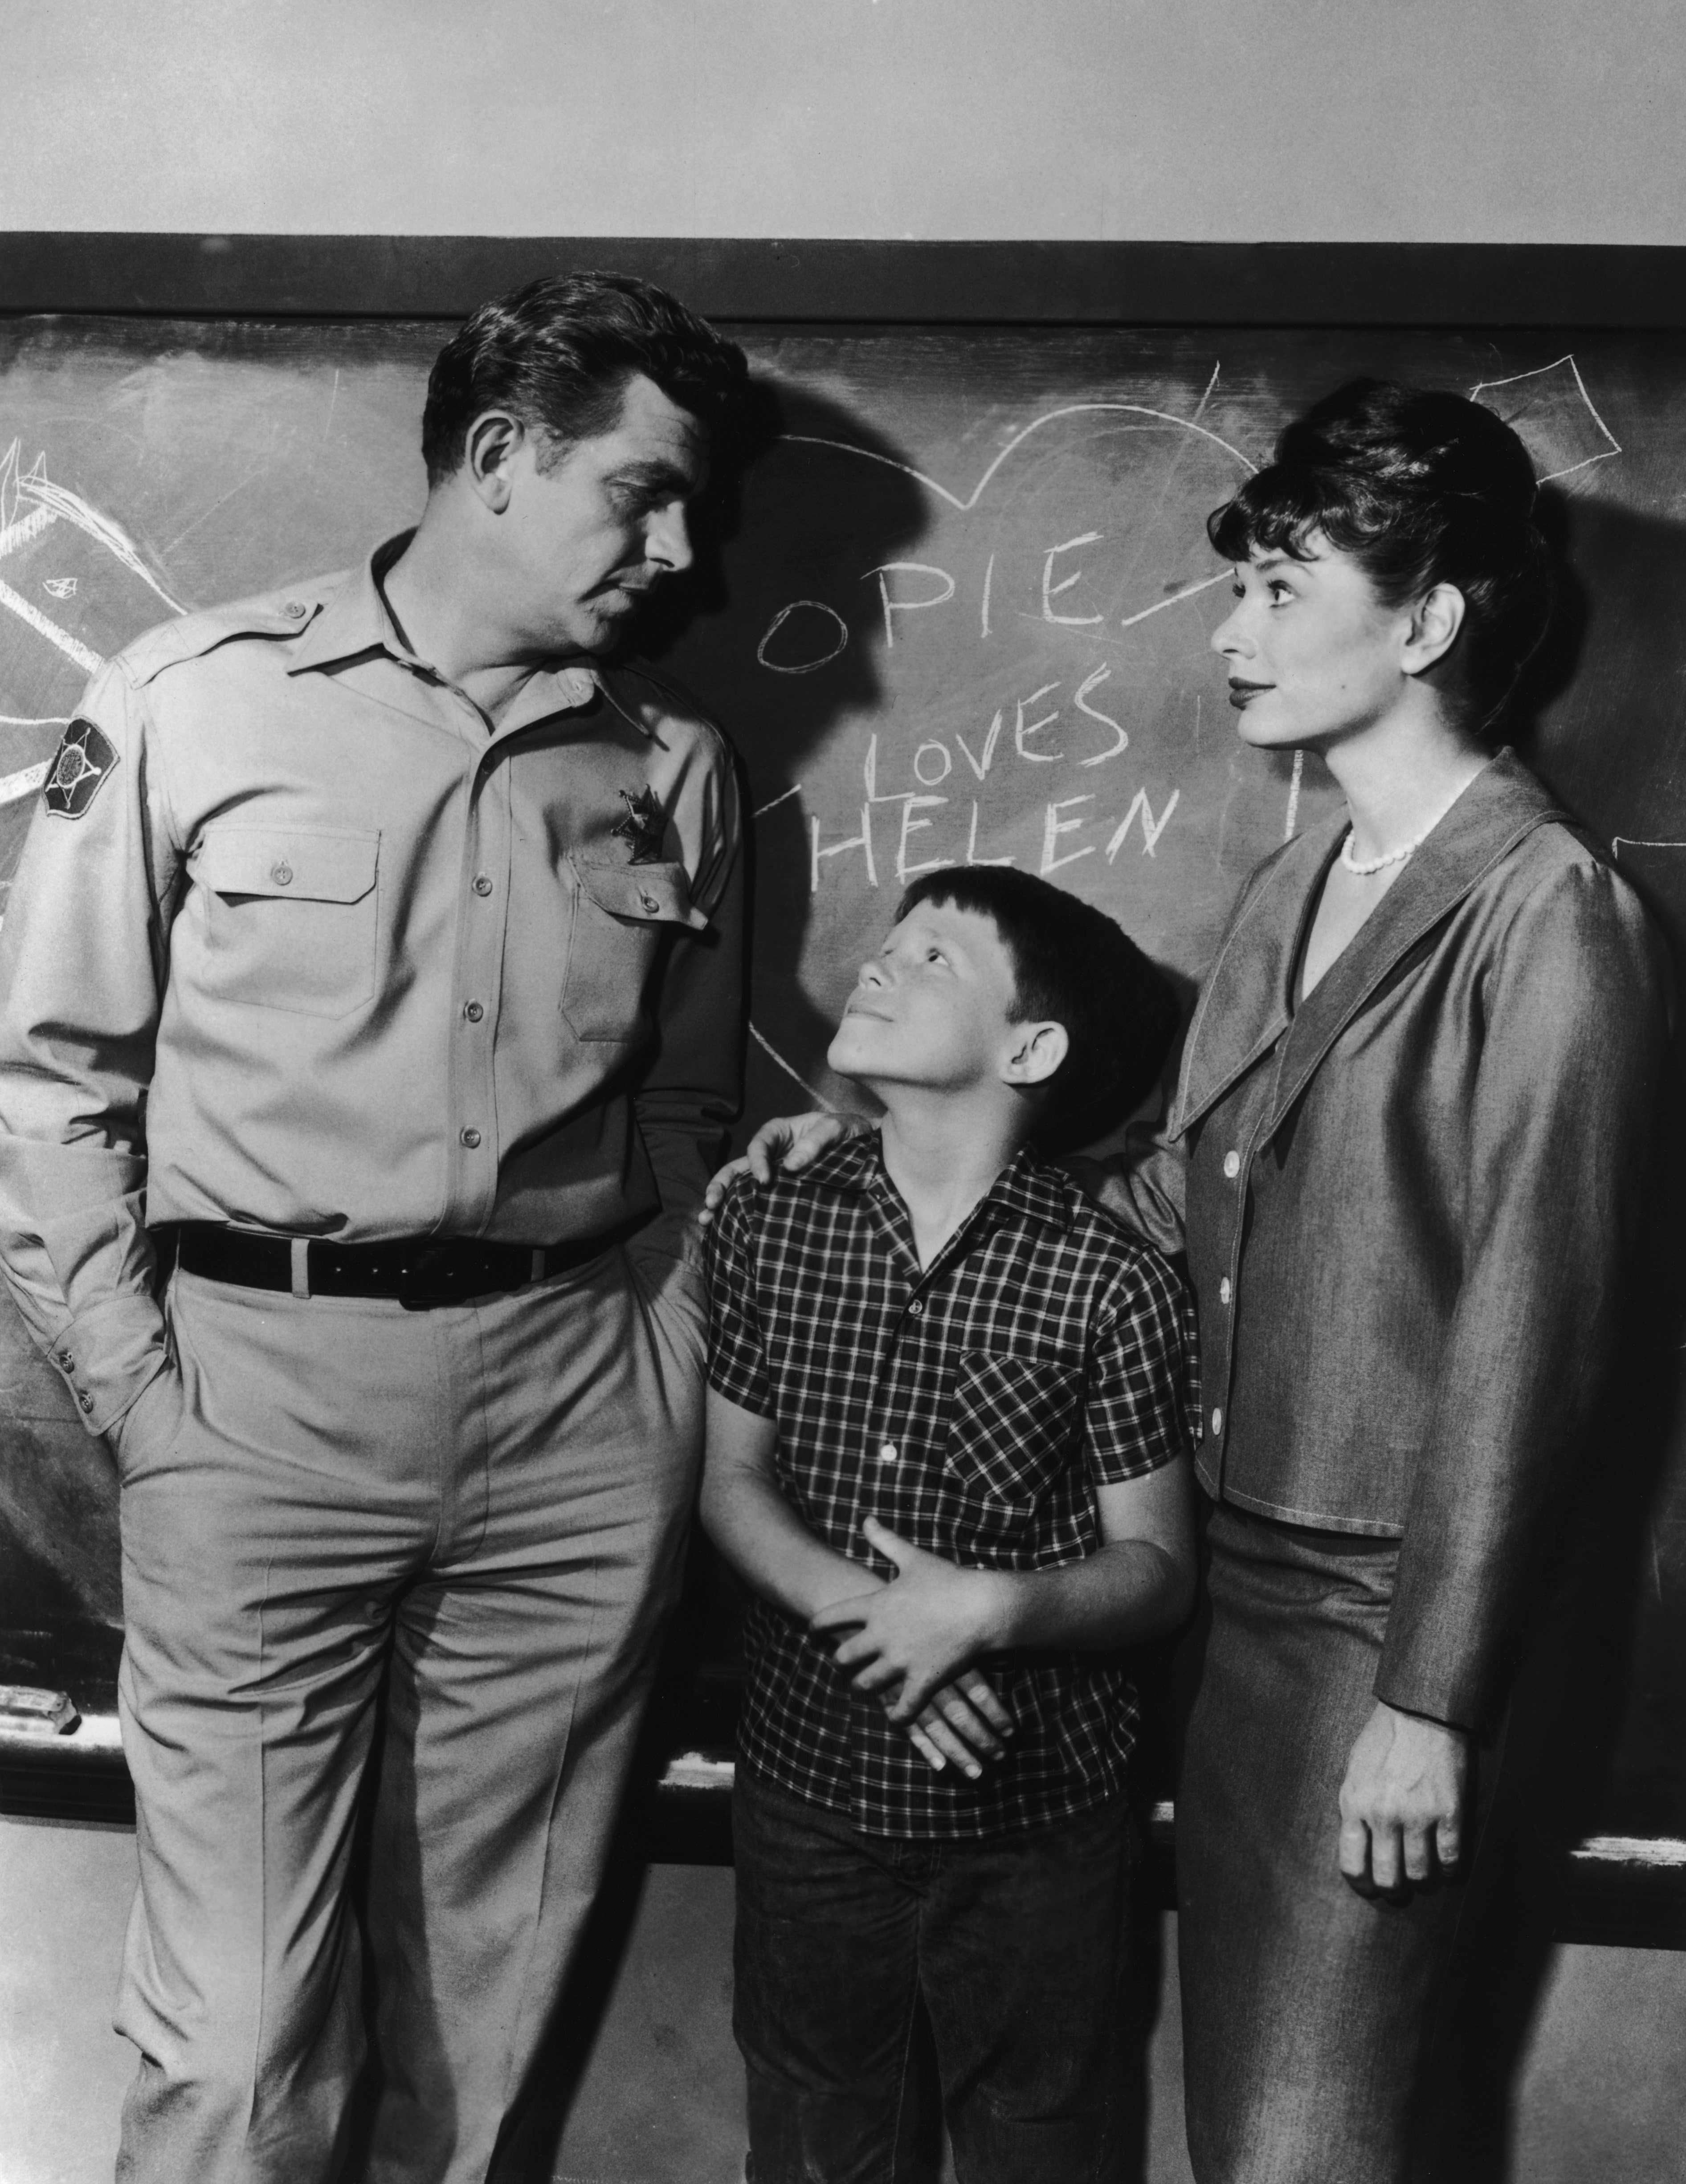 Andy Griffith, Ron Howard, and Aneta Corsaut from 'The Andy Griffith Show'